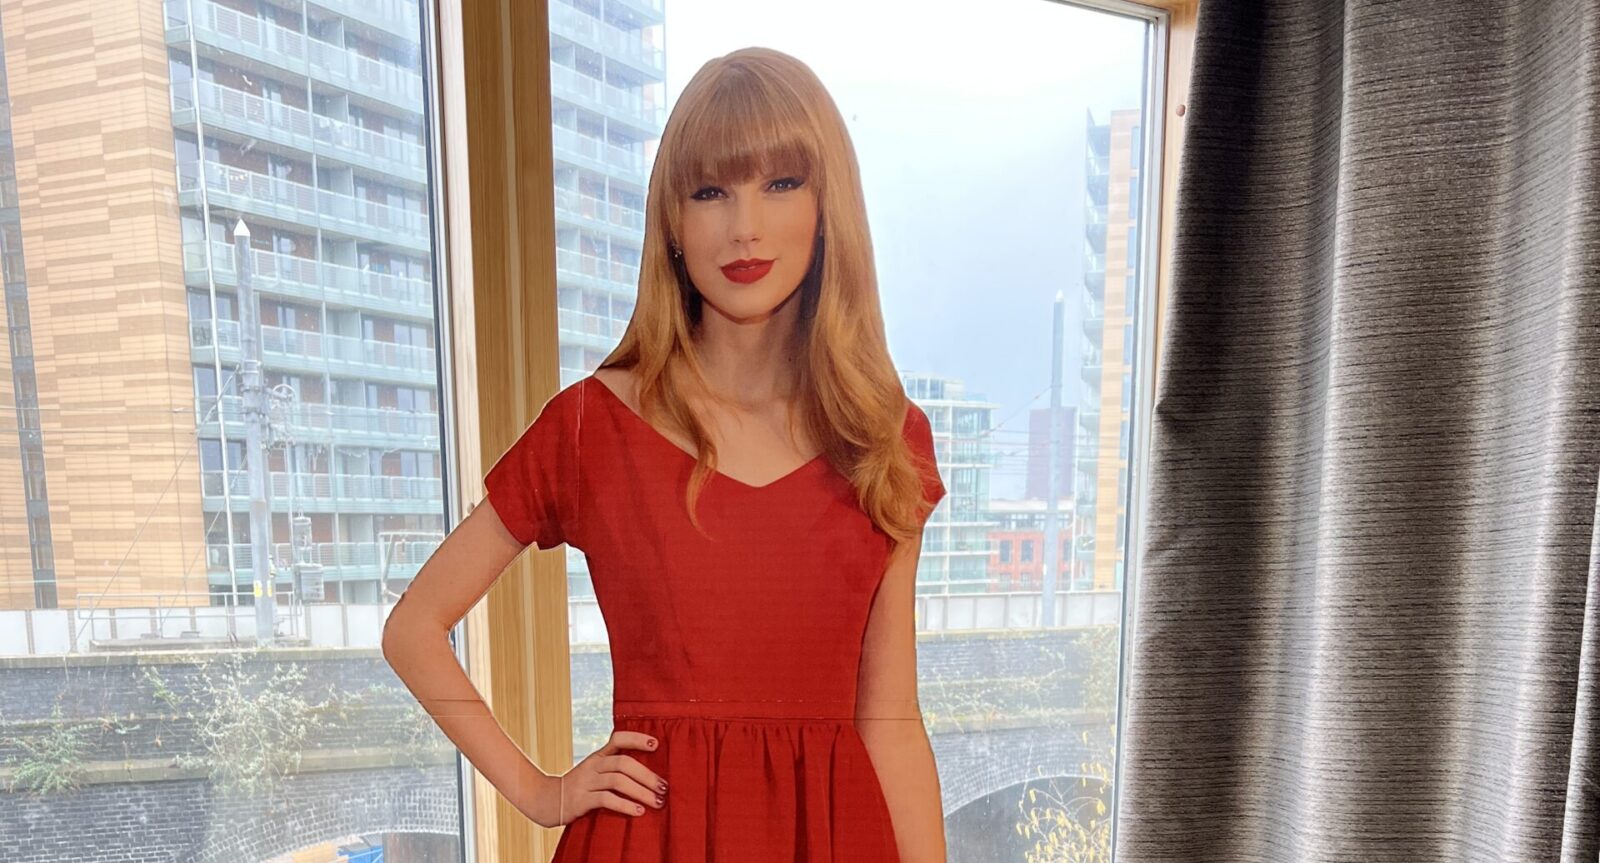 Hundreds bid to save Manchester's Taylor Swift cardboard cut-out